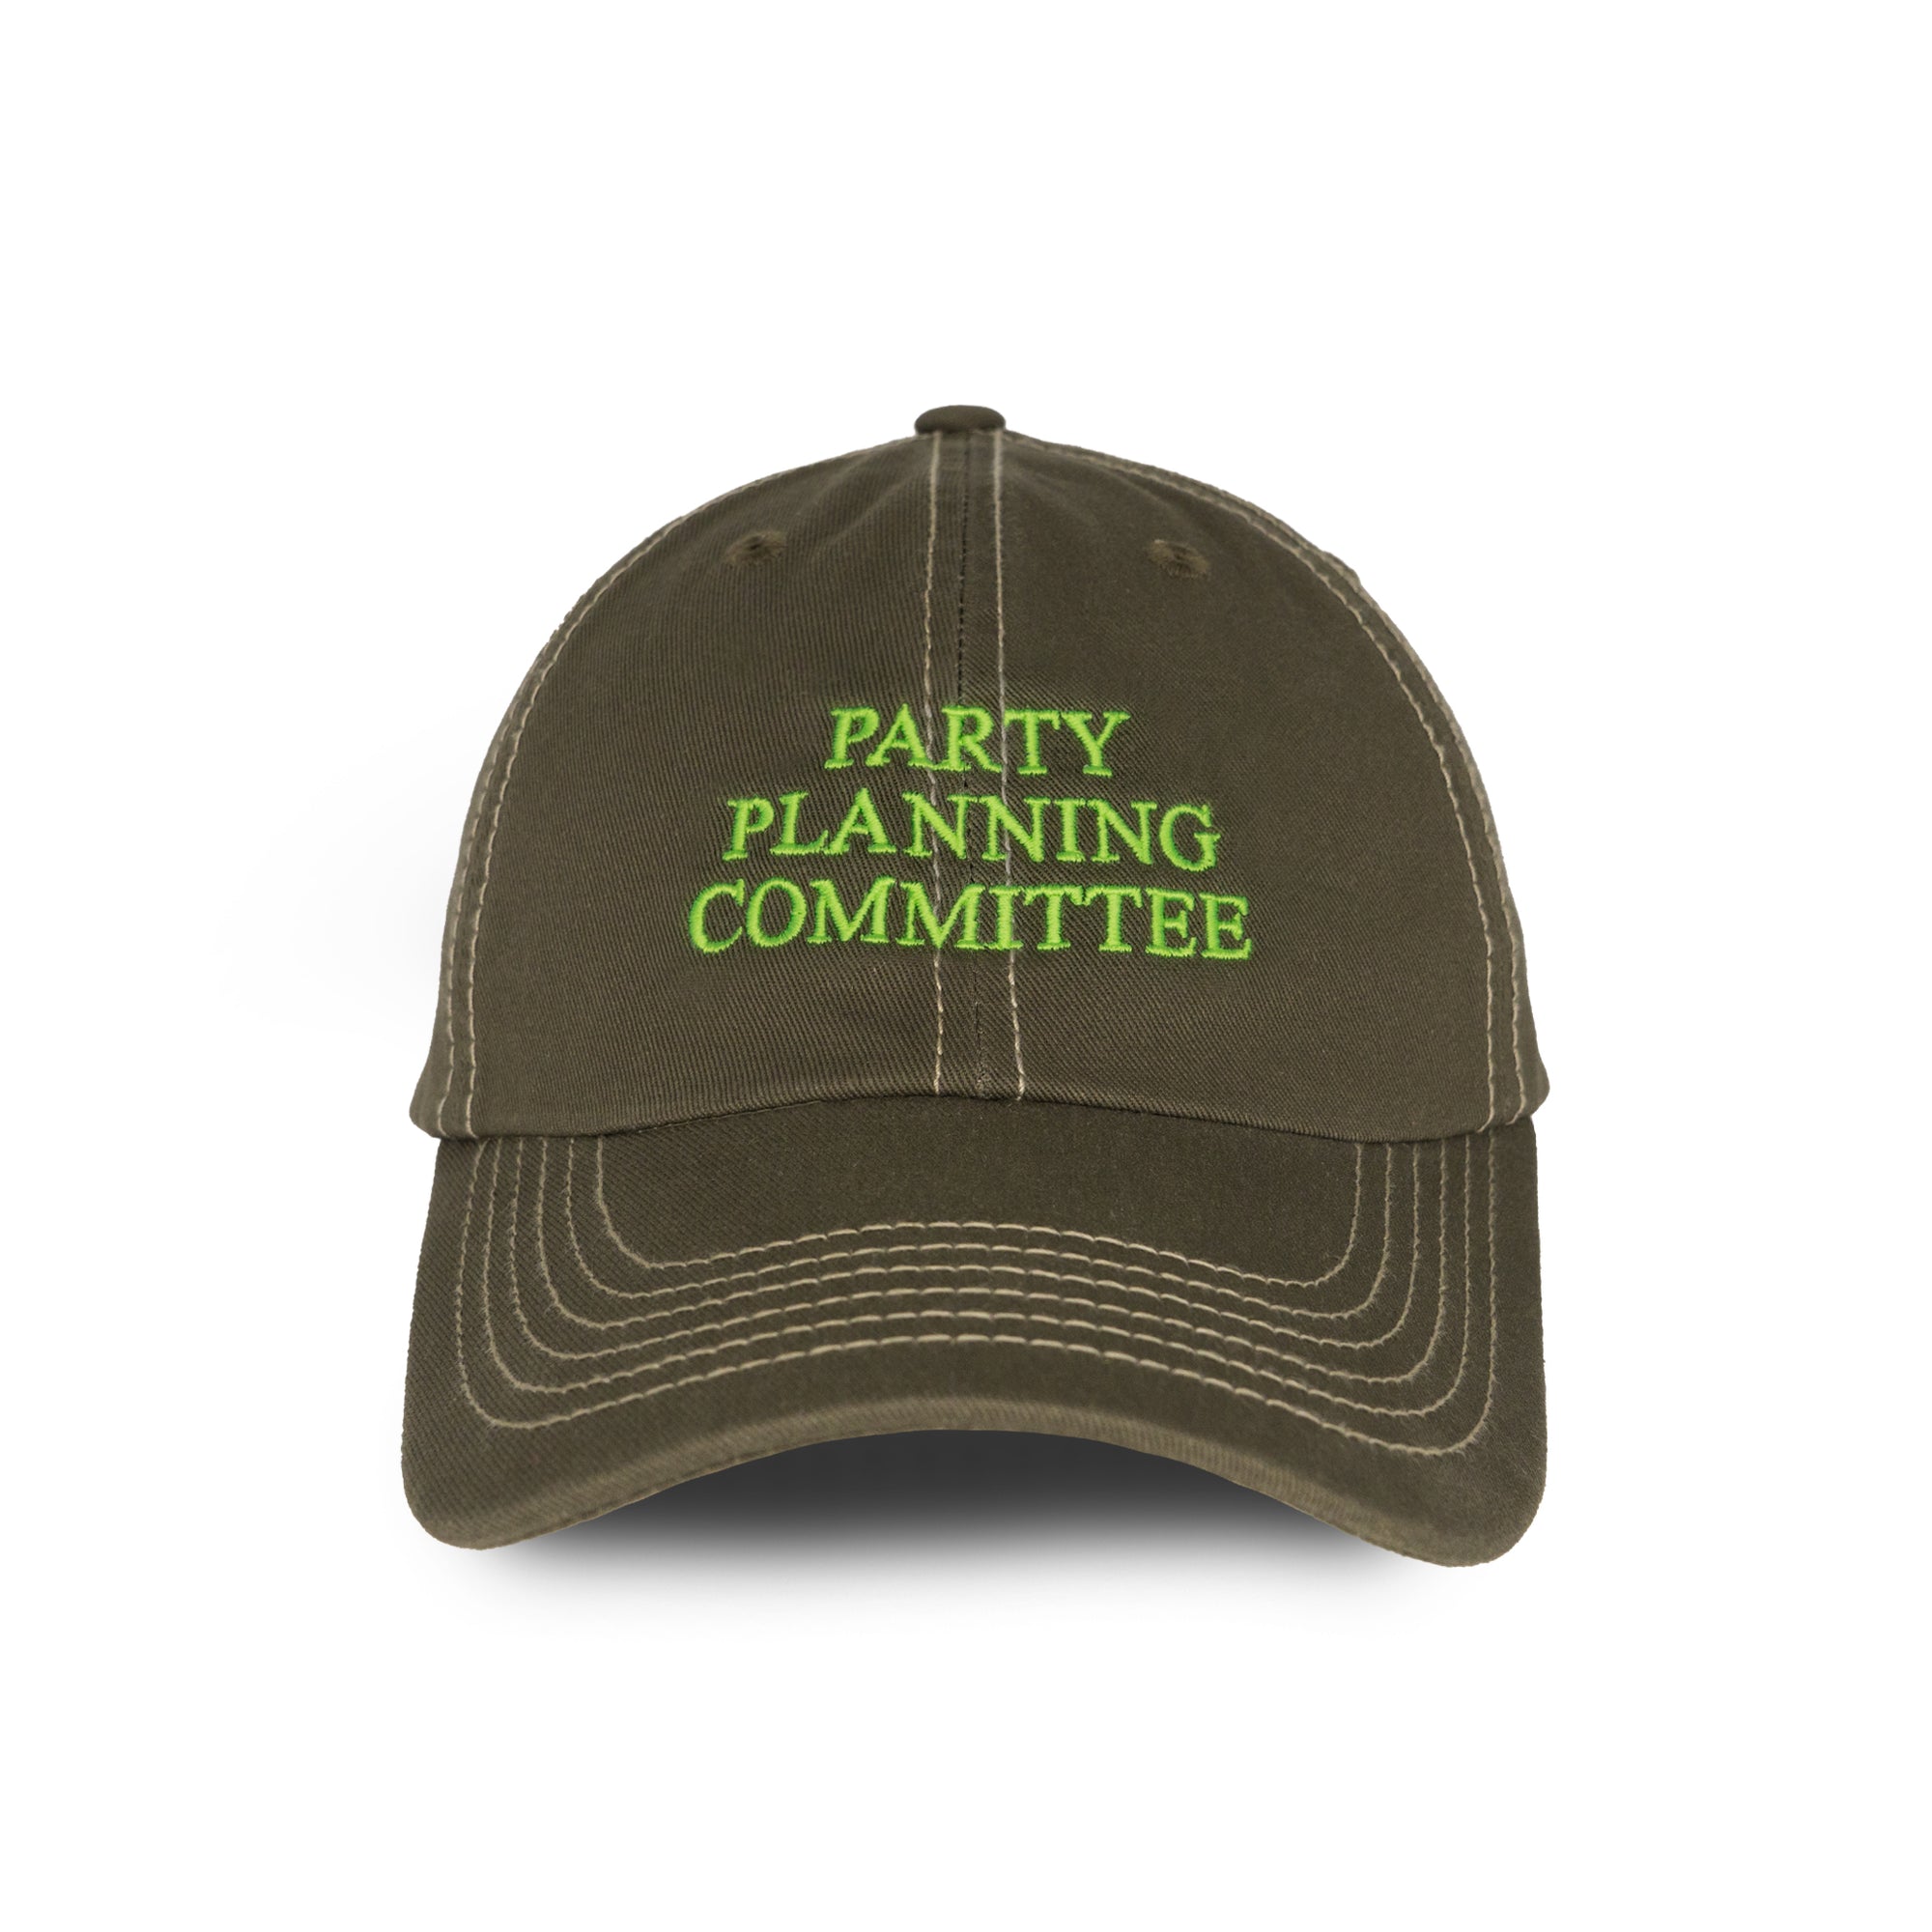 PARTY PLANNING COMMITTEE